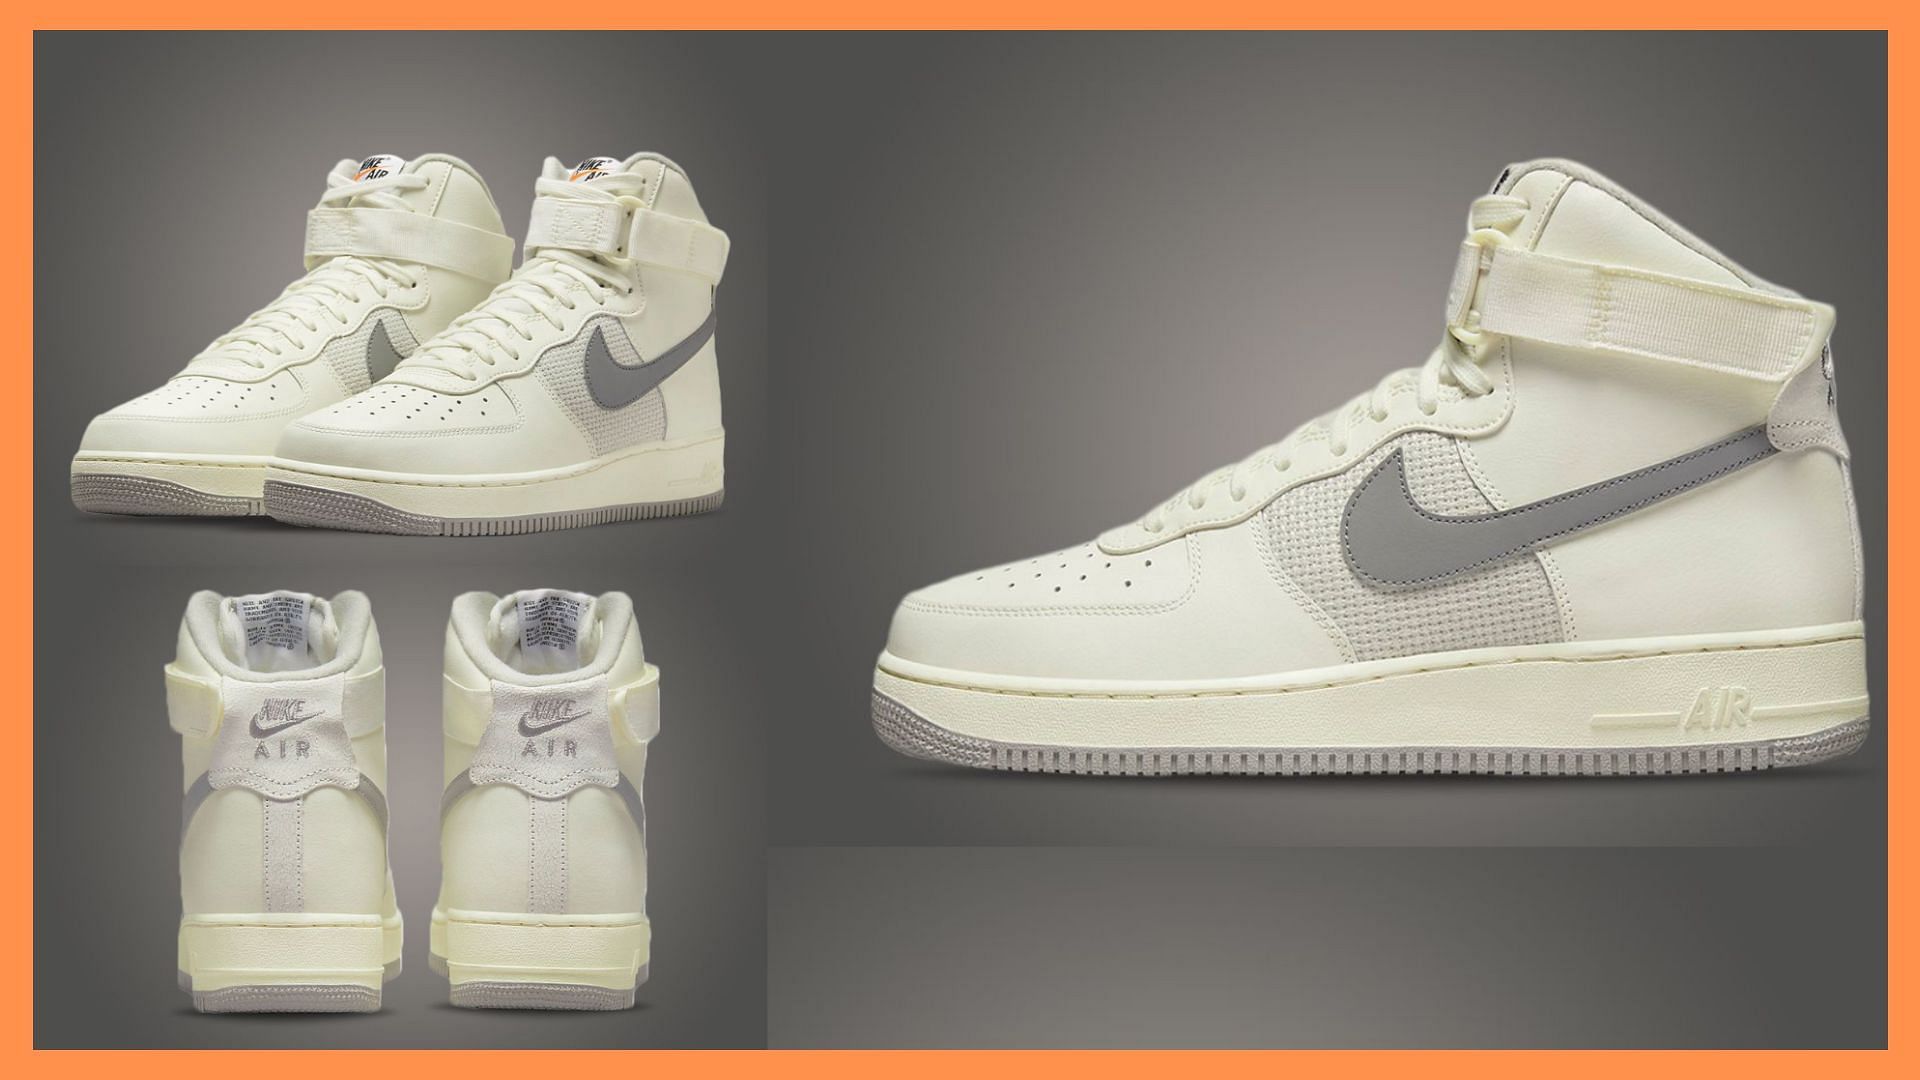 Where to buy Nike Force 1 High Vintage Sail shoes? Price, release date and more details explored